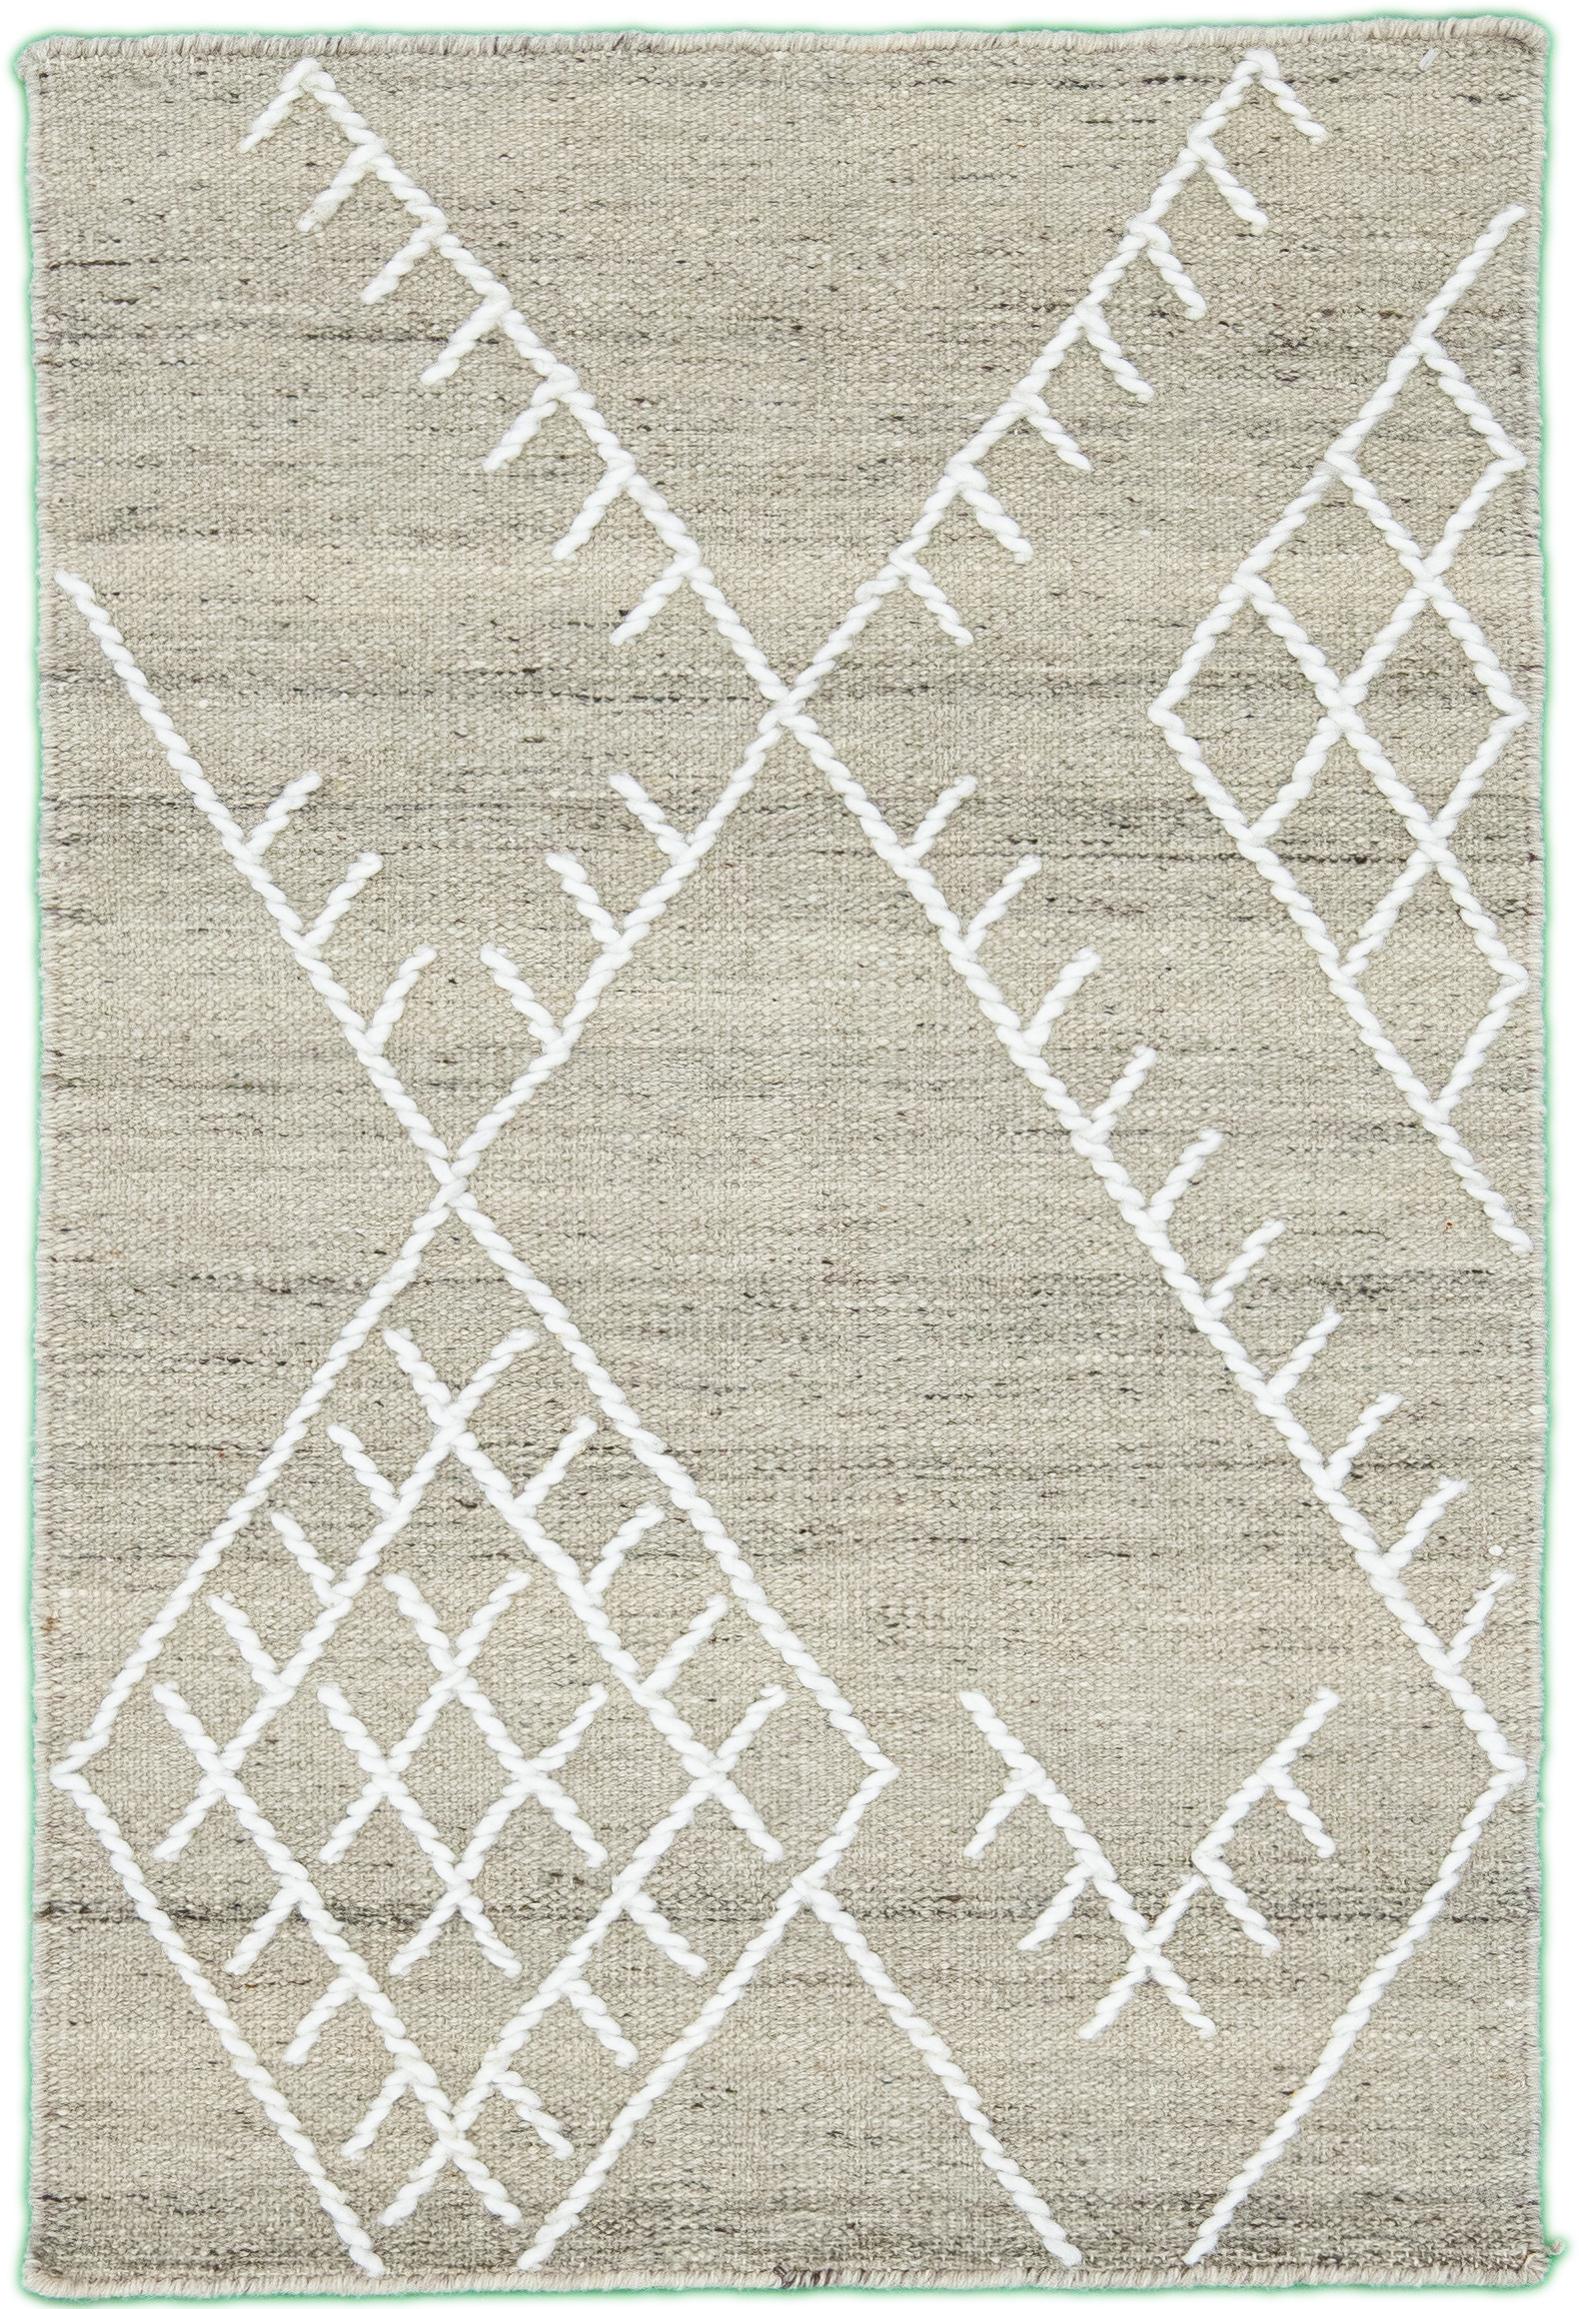 Apadana's Nantucket Collection wool custom rug. Custom sizes and colors made-to-order. 

Material: Wool 
Techniques: Flatweave
Style: Geometric-Coastal
Lead time: Approx. 9-10 wks available 
Colors: As shown, other custom colors are available.